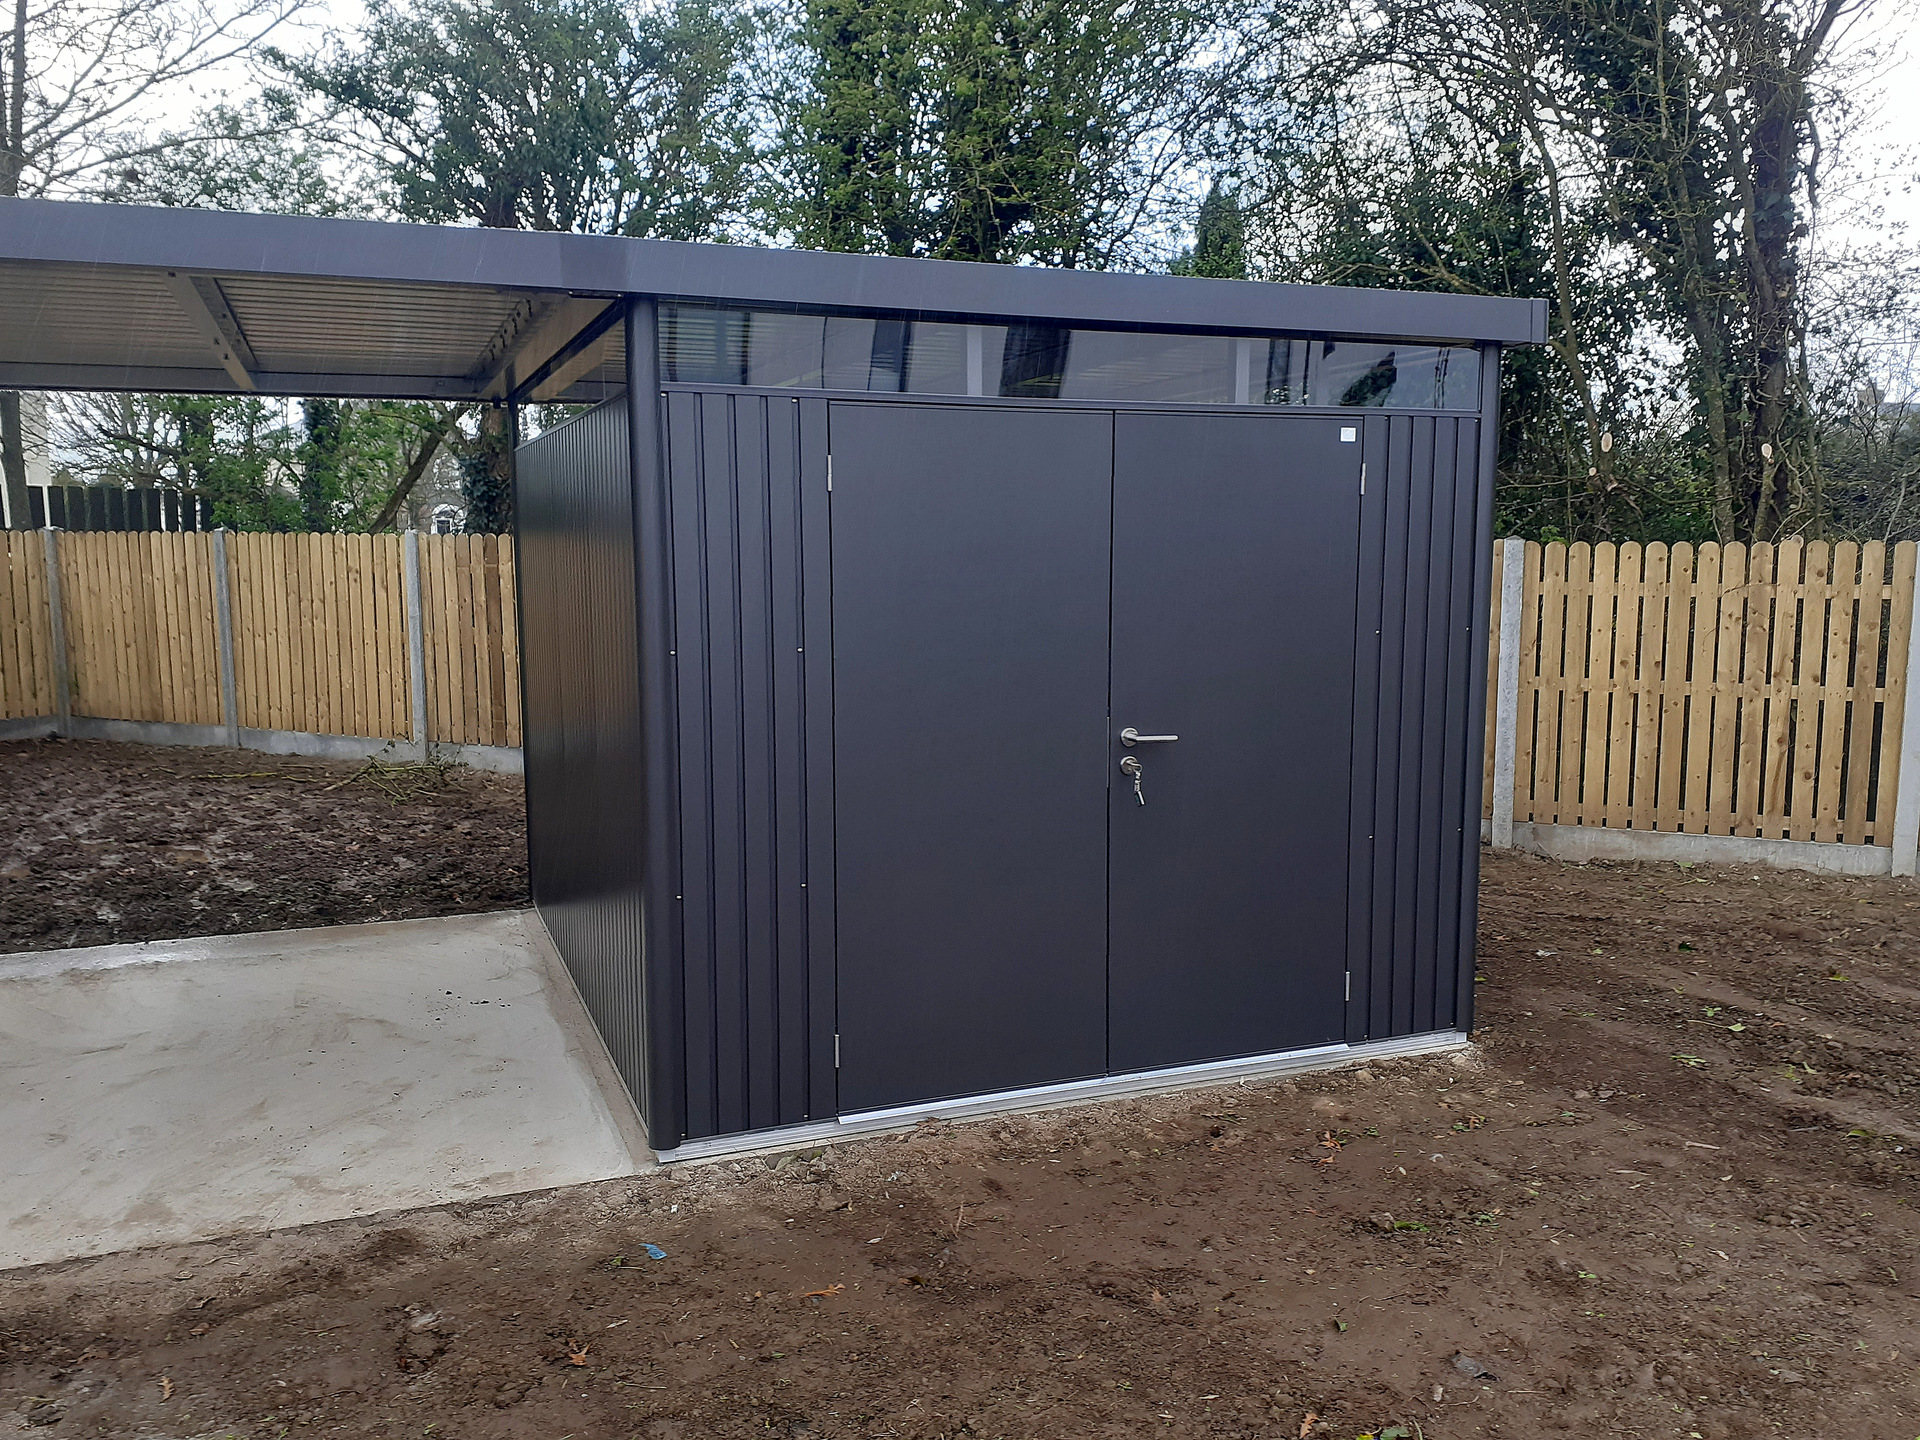 Biohort HighLine H5 Garden Shed with Side Canopy - supplied + fitted in Thurles, Co Tipperary,  | Owen Chubb Garden Landscapers, Ireland's Premier Dealer & Installer of Biohort Garden Storage